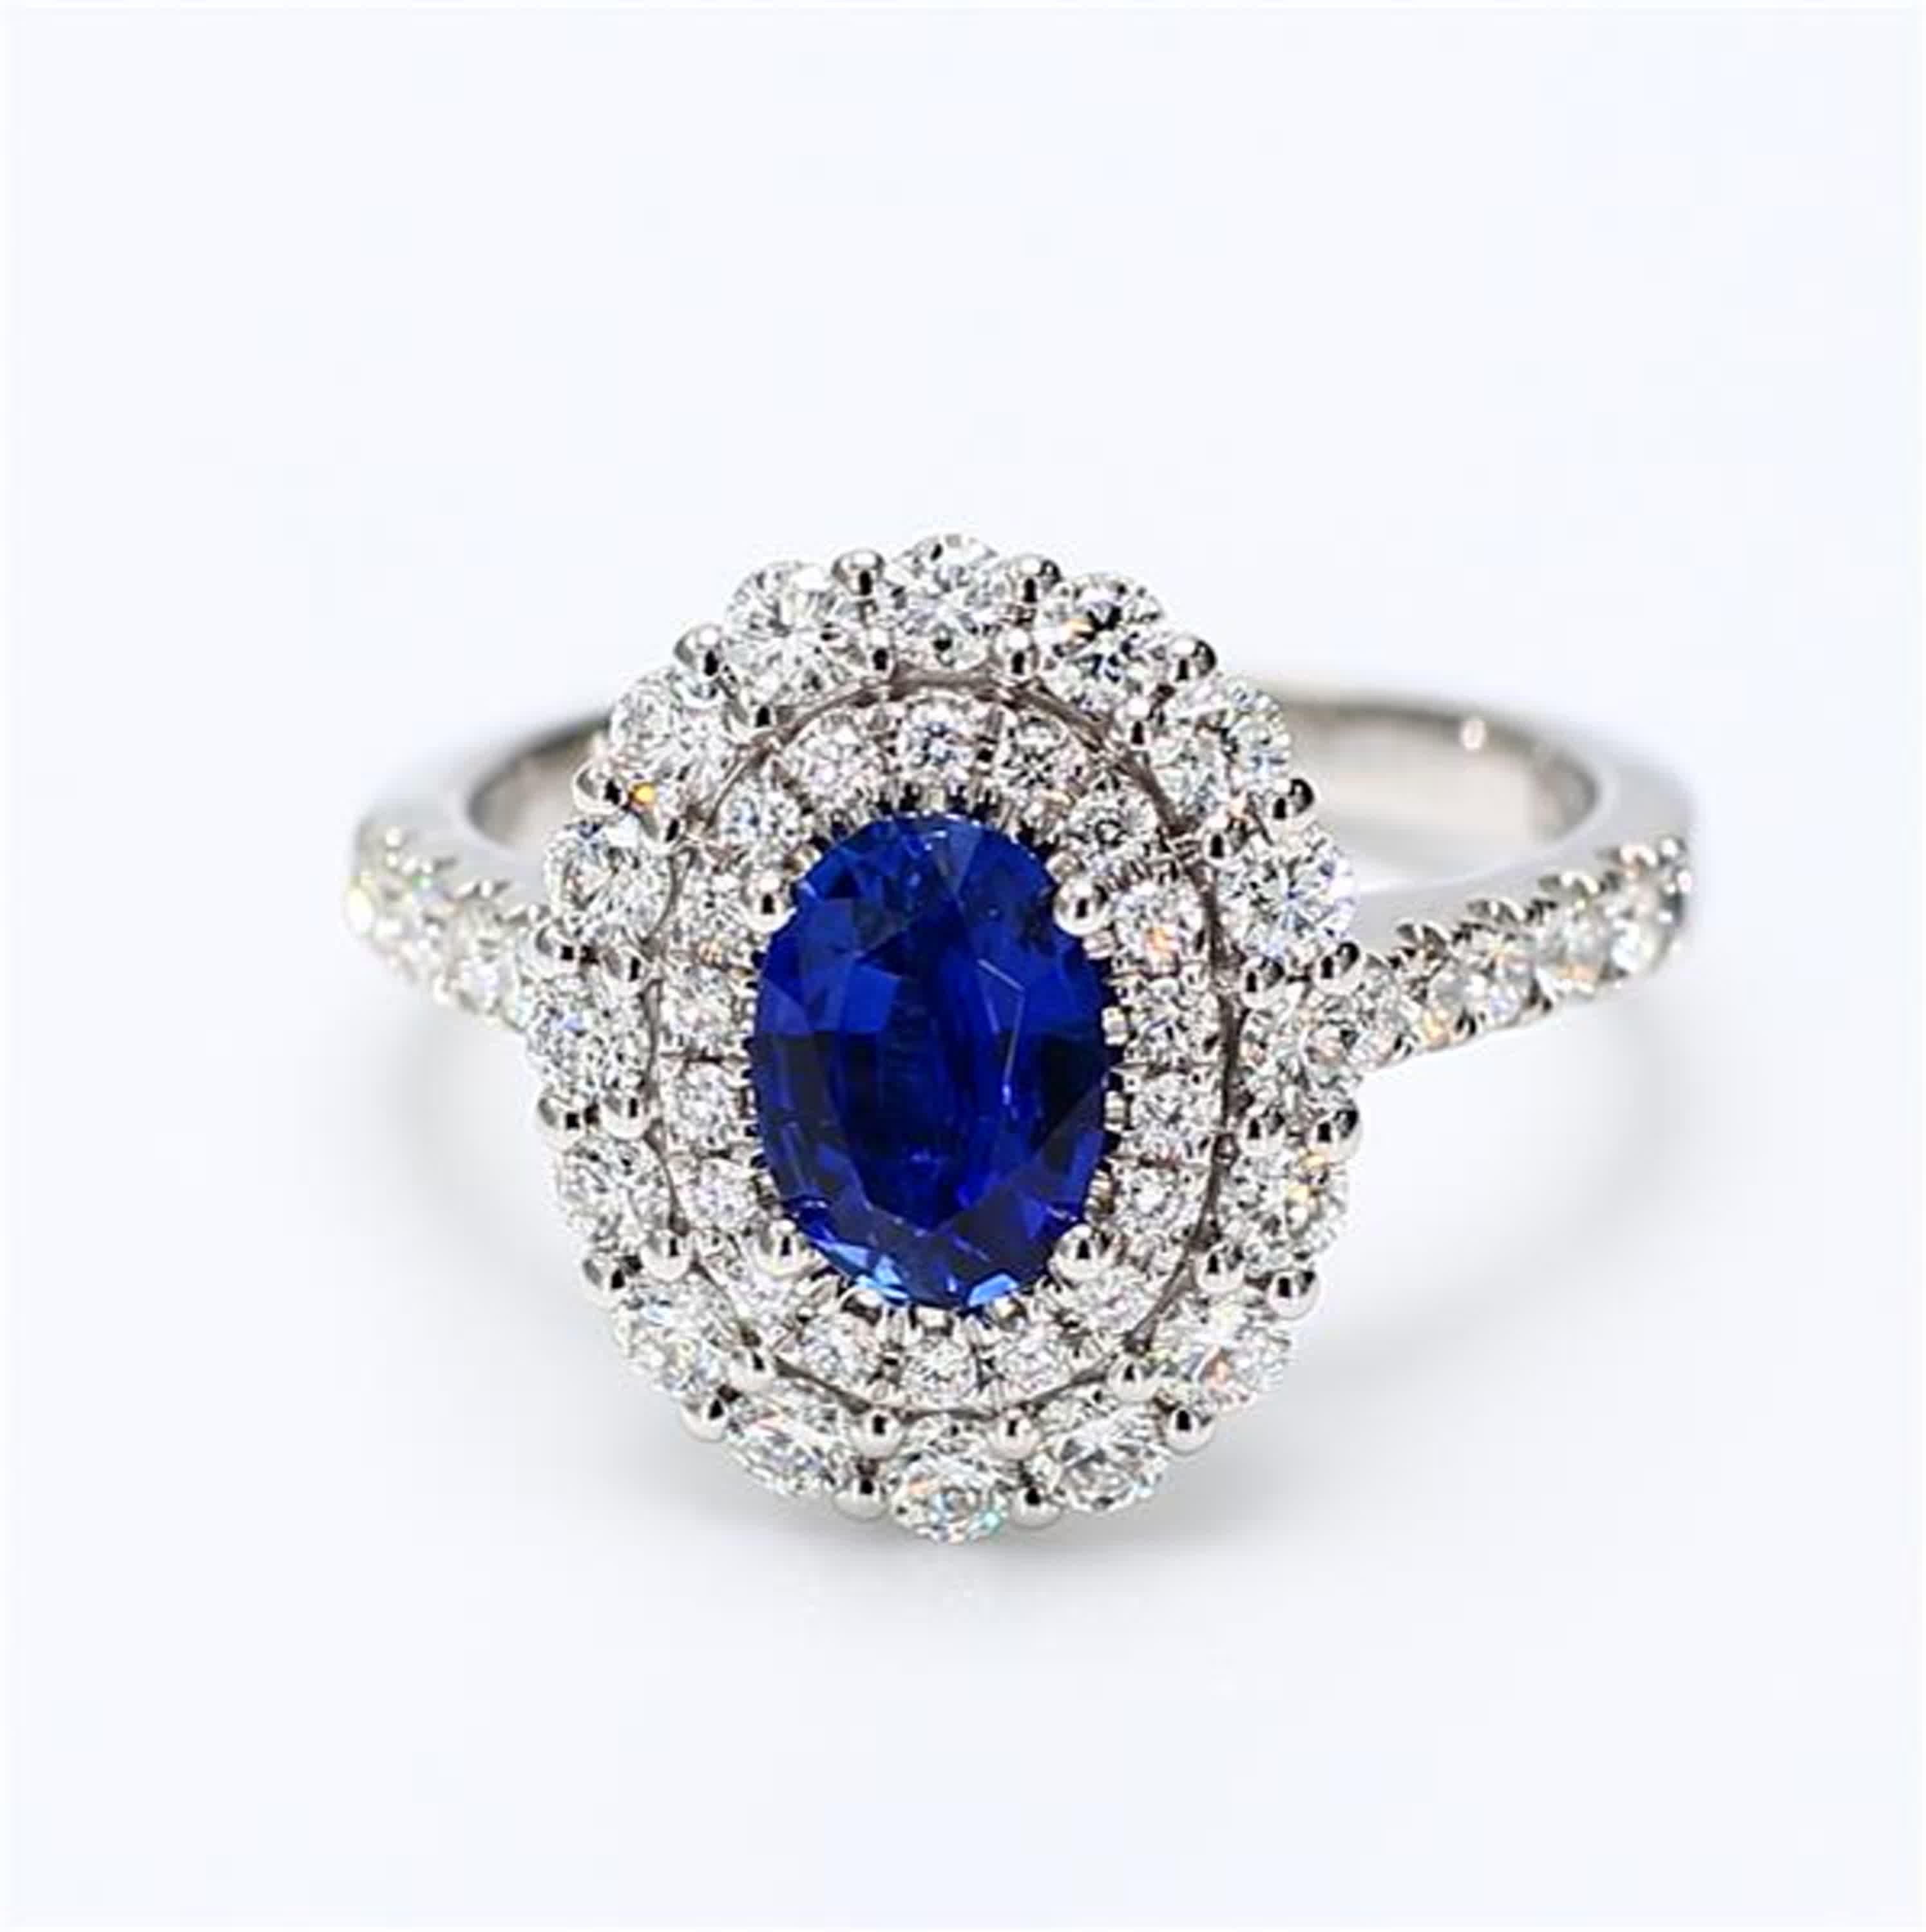 RareGemWorld's classic sapphire ring. Mounted in a beautiful 18K White Gold setting with a natural oval cut blue sapphire. The sapphire is surrounded by natural round white diamond melee. This ring is guaranteed to impress and enhance your personal